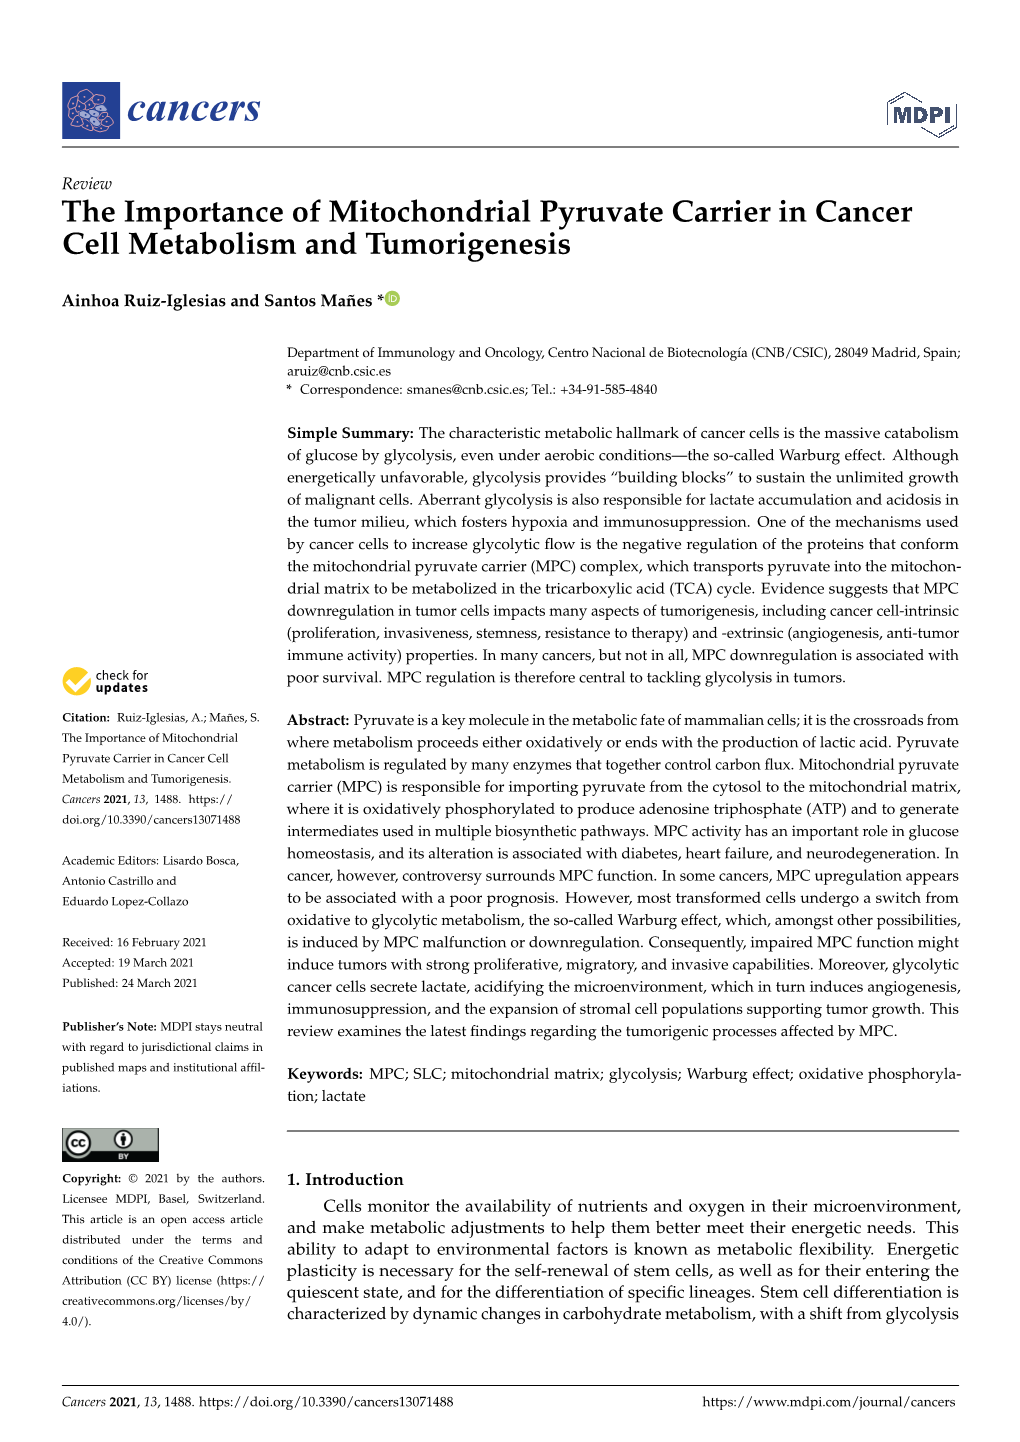 The Importance of Mitochondrial Pyruvate Carrier in Cancer Cell Metabolism and Tumorigenesis